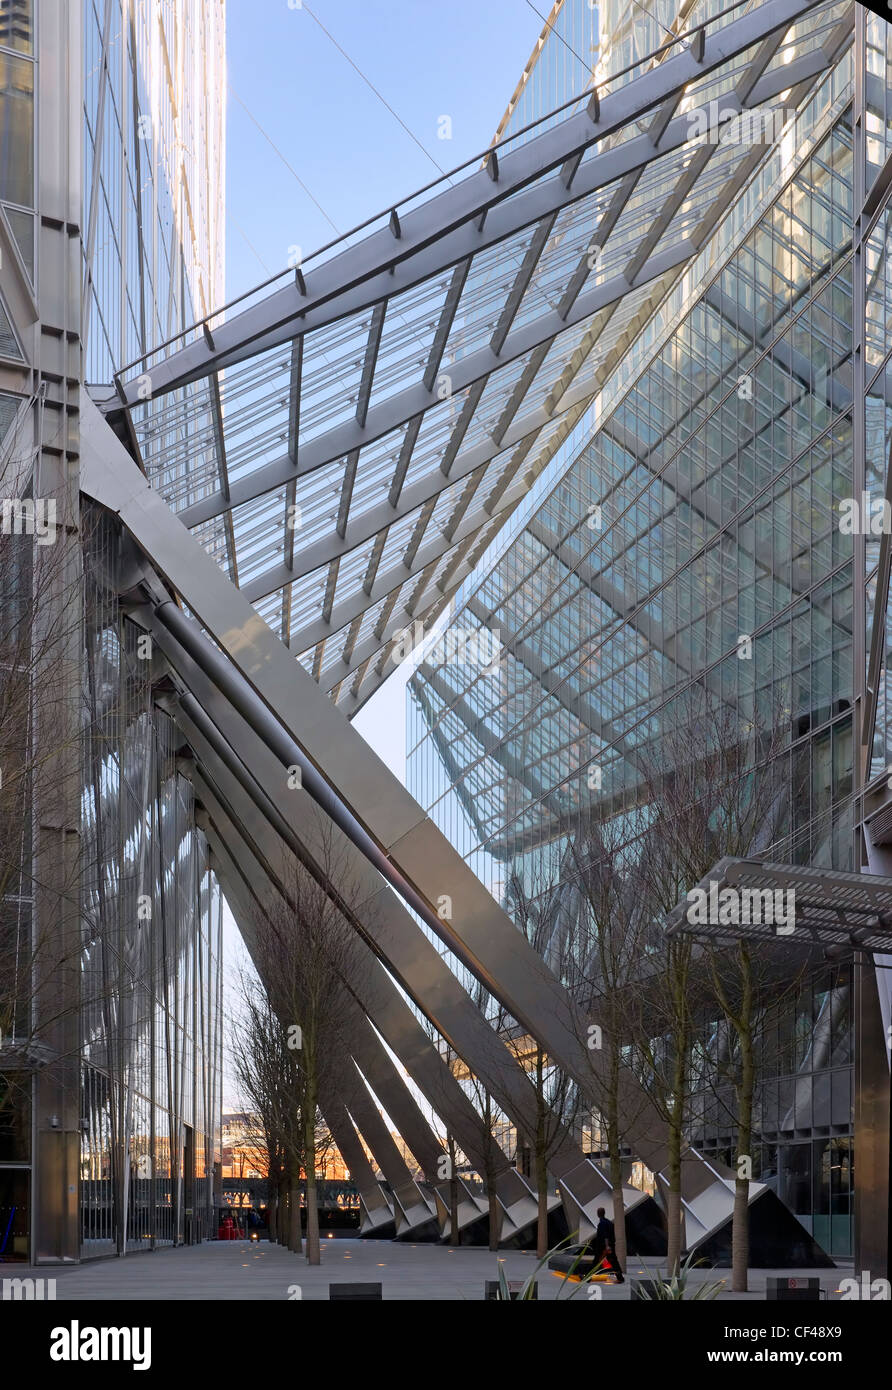 Broadgate Tower atrium that links the Tower with 201 Bishopsgate, seen from Primrose Street outside Liverpool Street station. Stock Photo